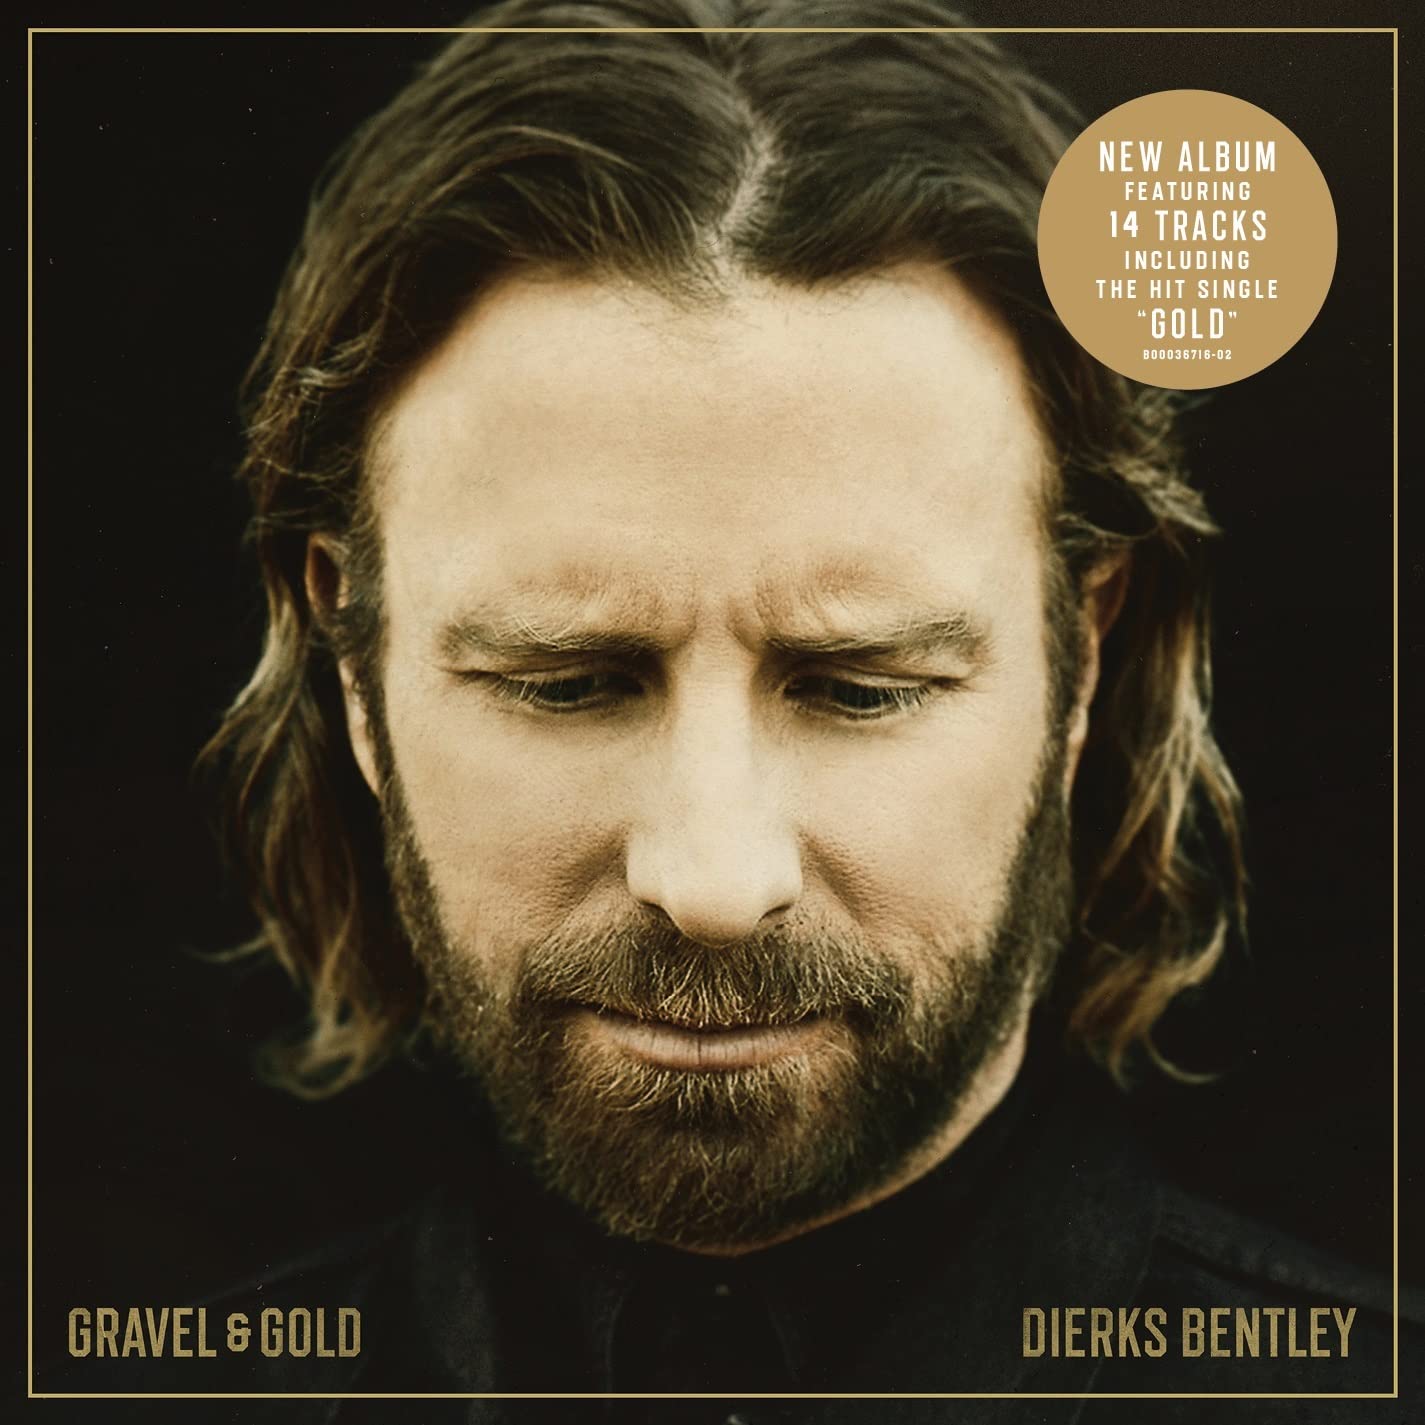 Dierks Bentley: Gold and Gravel